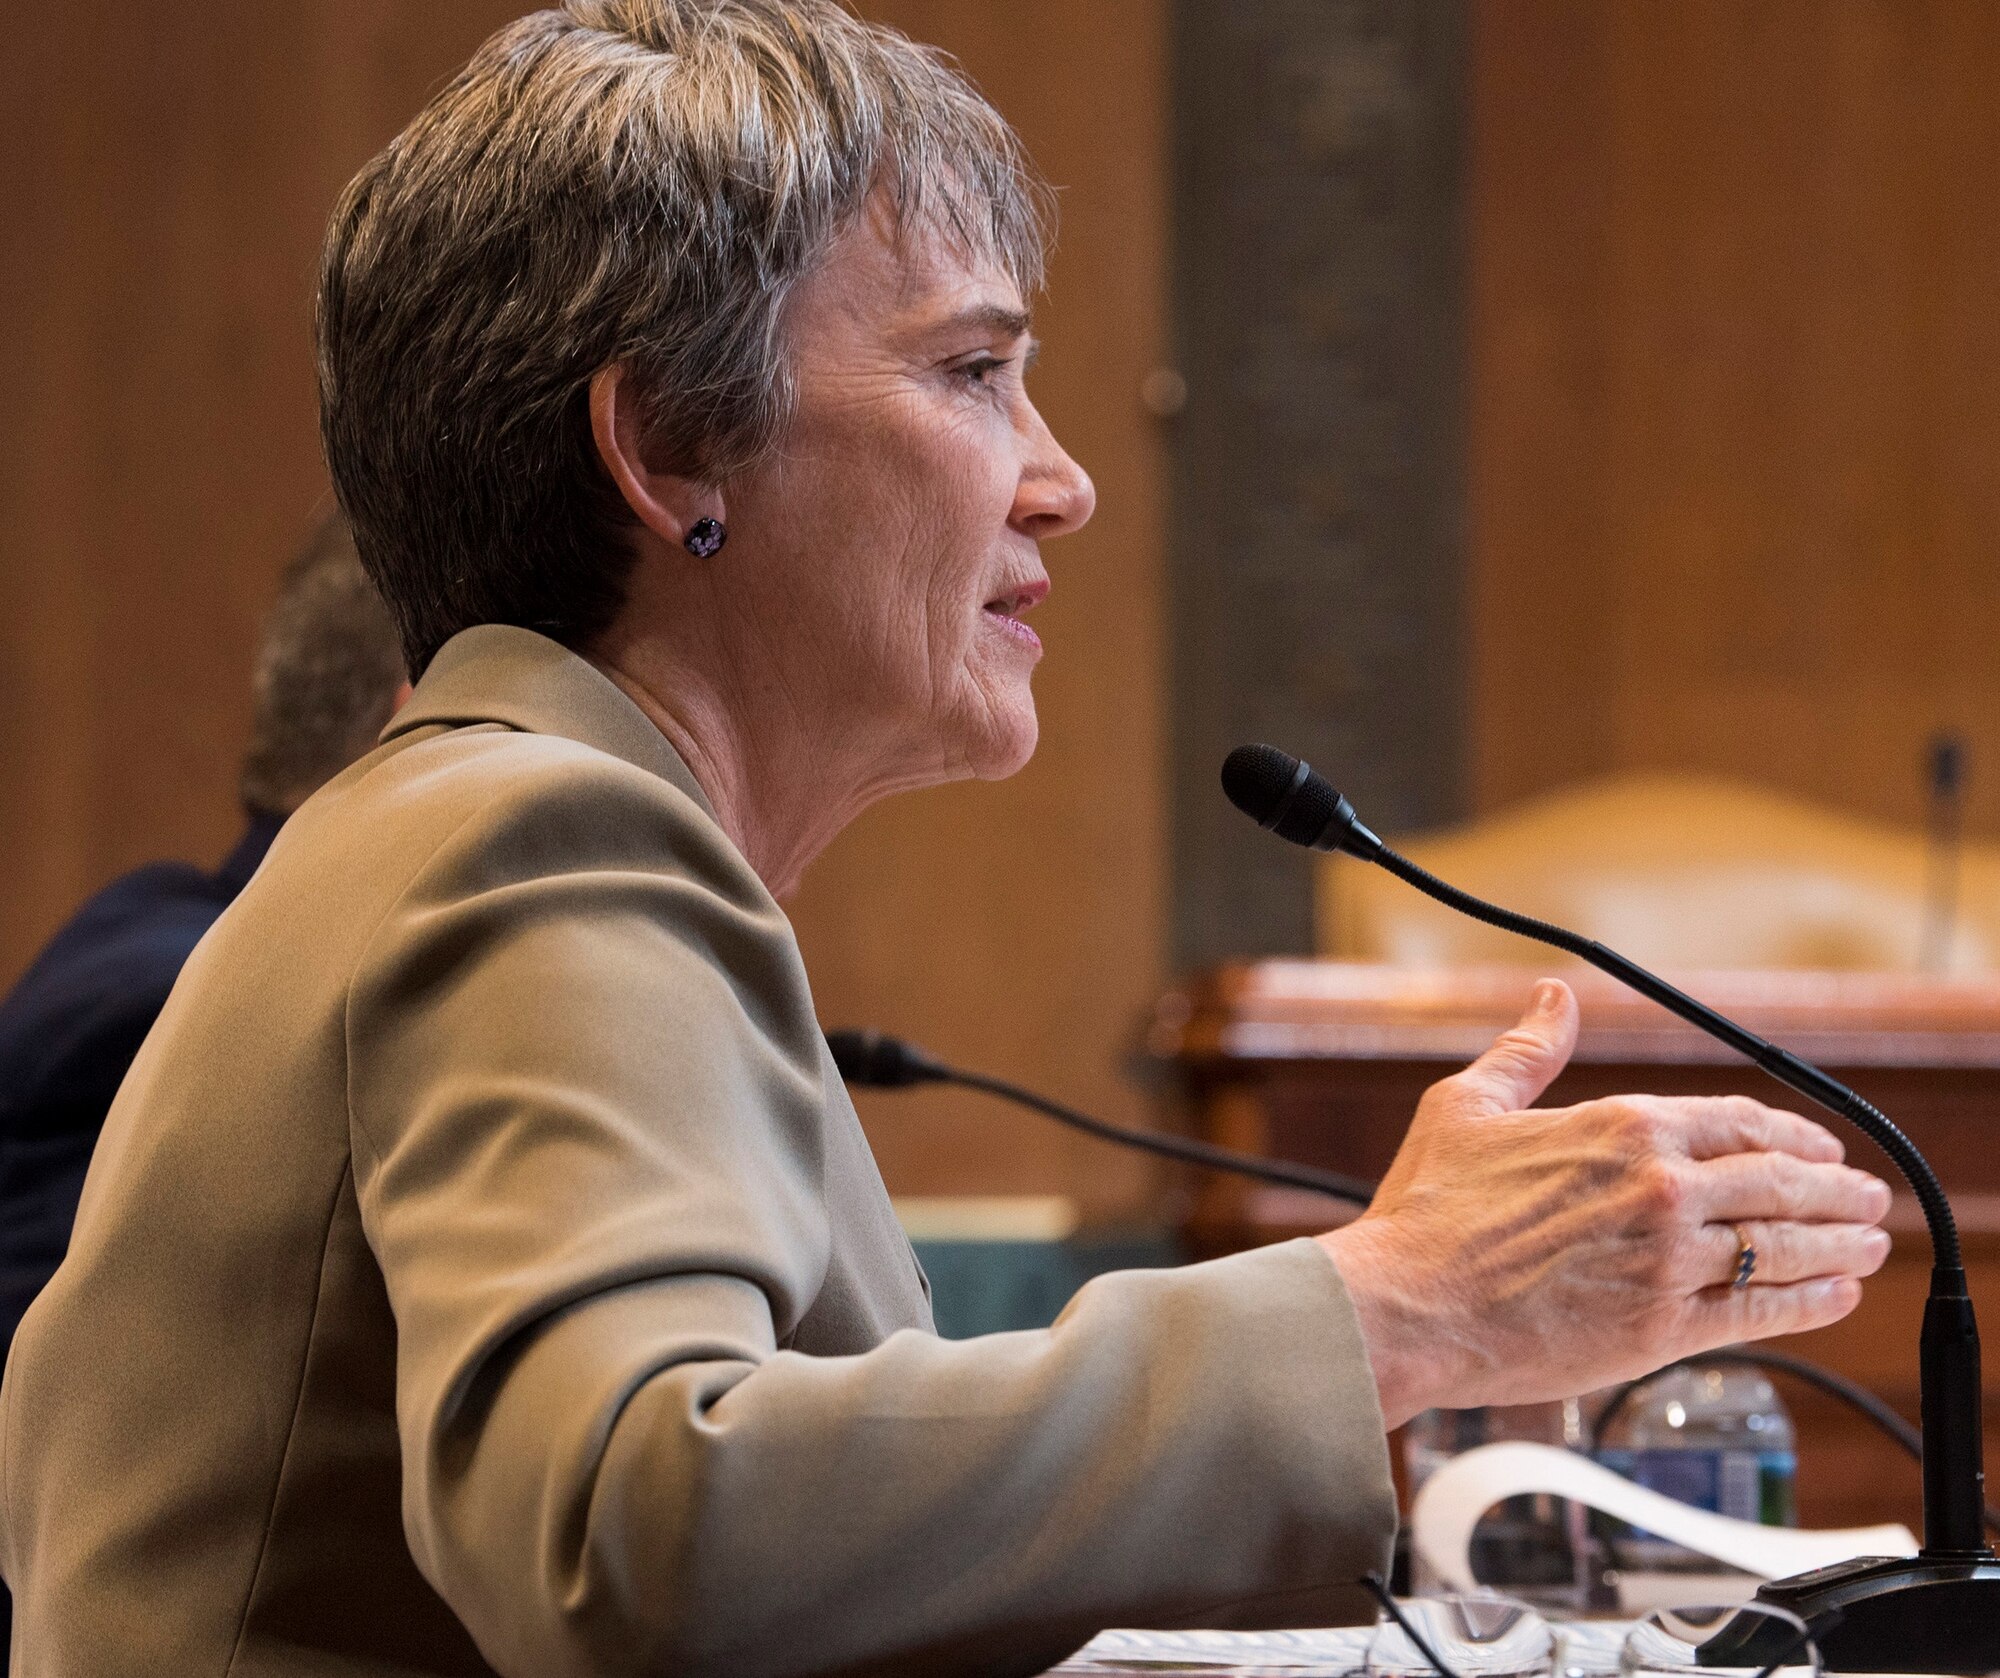 Secretary of the Air Force Heather Wilson testifies during a Senate Appropriations Committee hearing on the fiscal year 2020 funding request and budget justification for the Department of the Air Force in Washington, D.C., March 13, 2019.